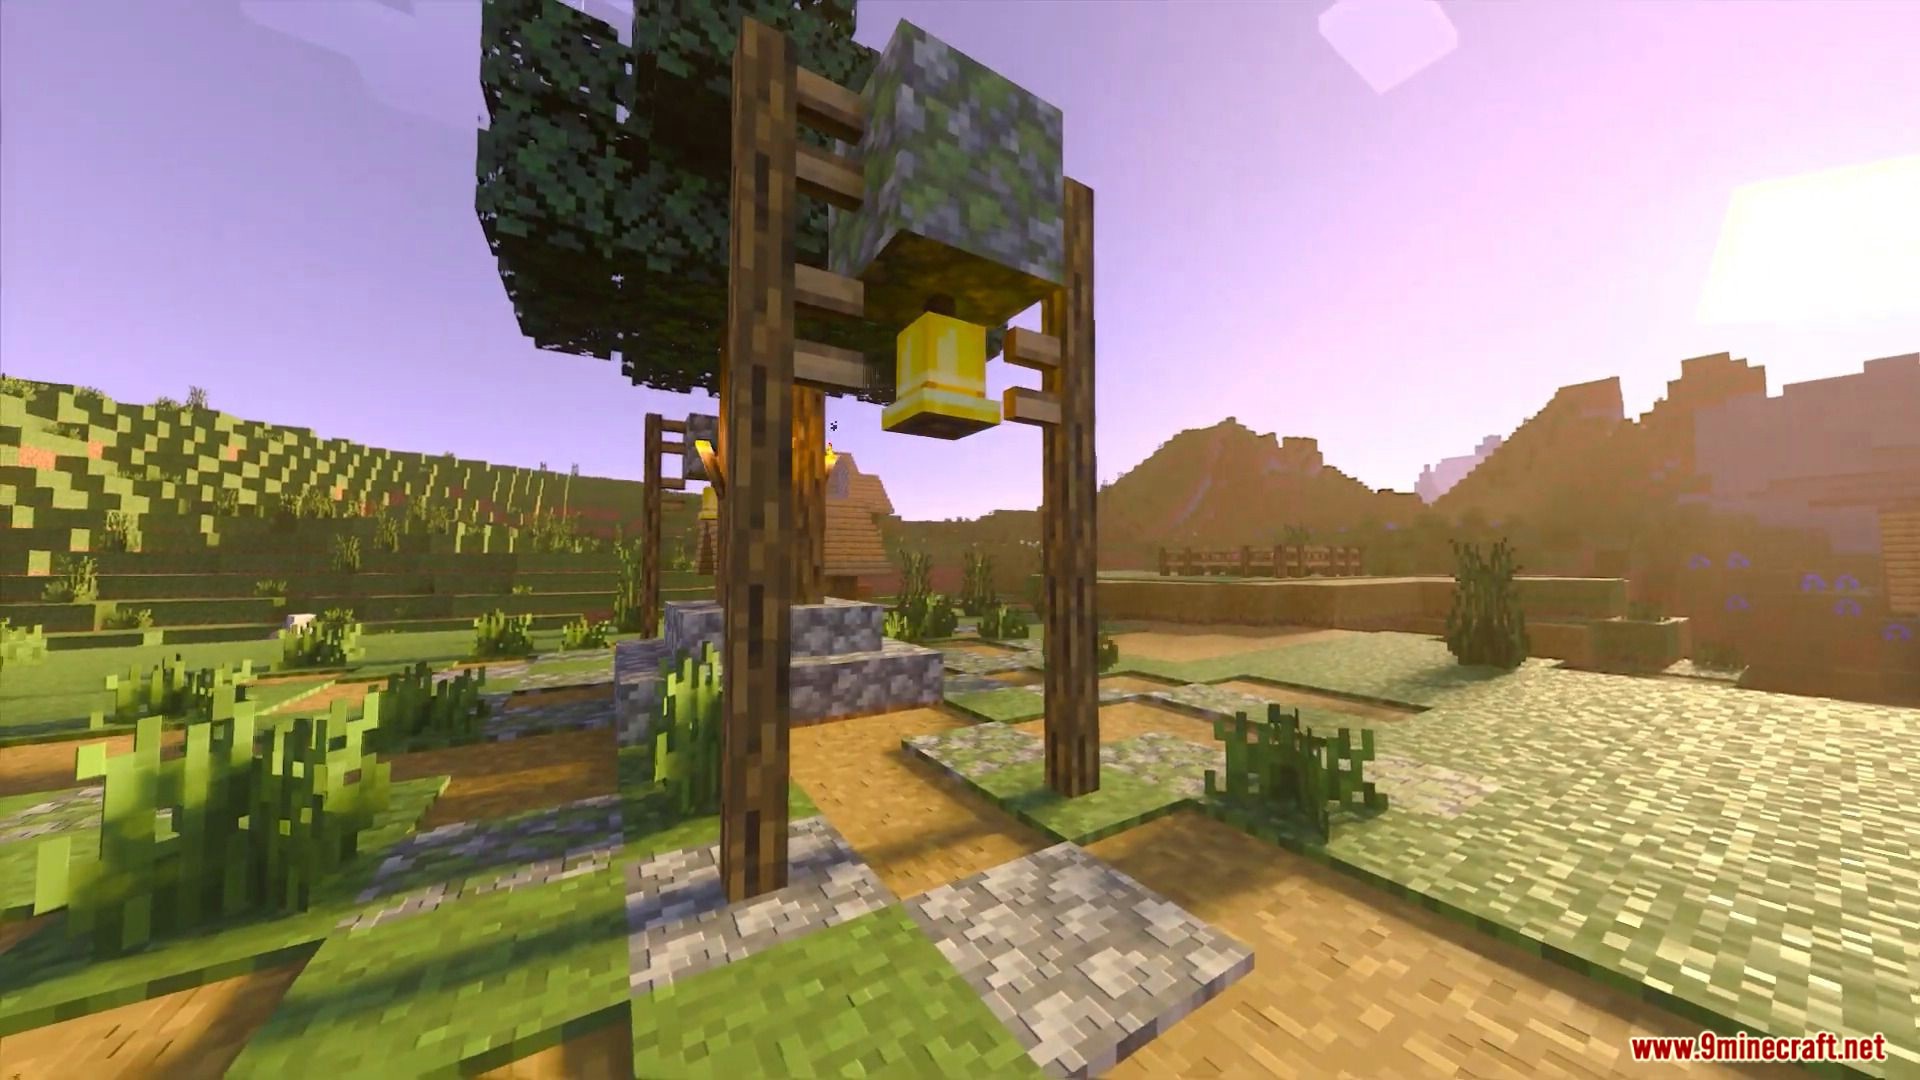 RTX Shaders for Minecraft PE for Android - Free App Download